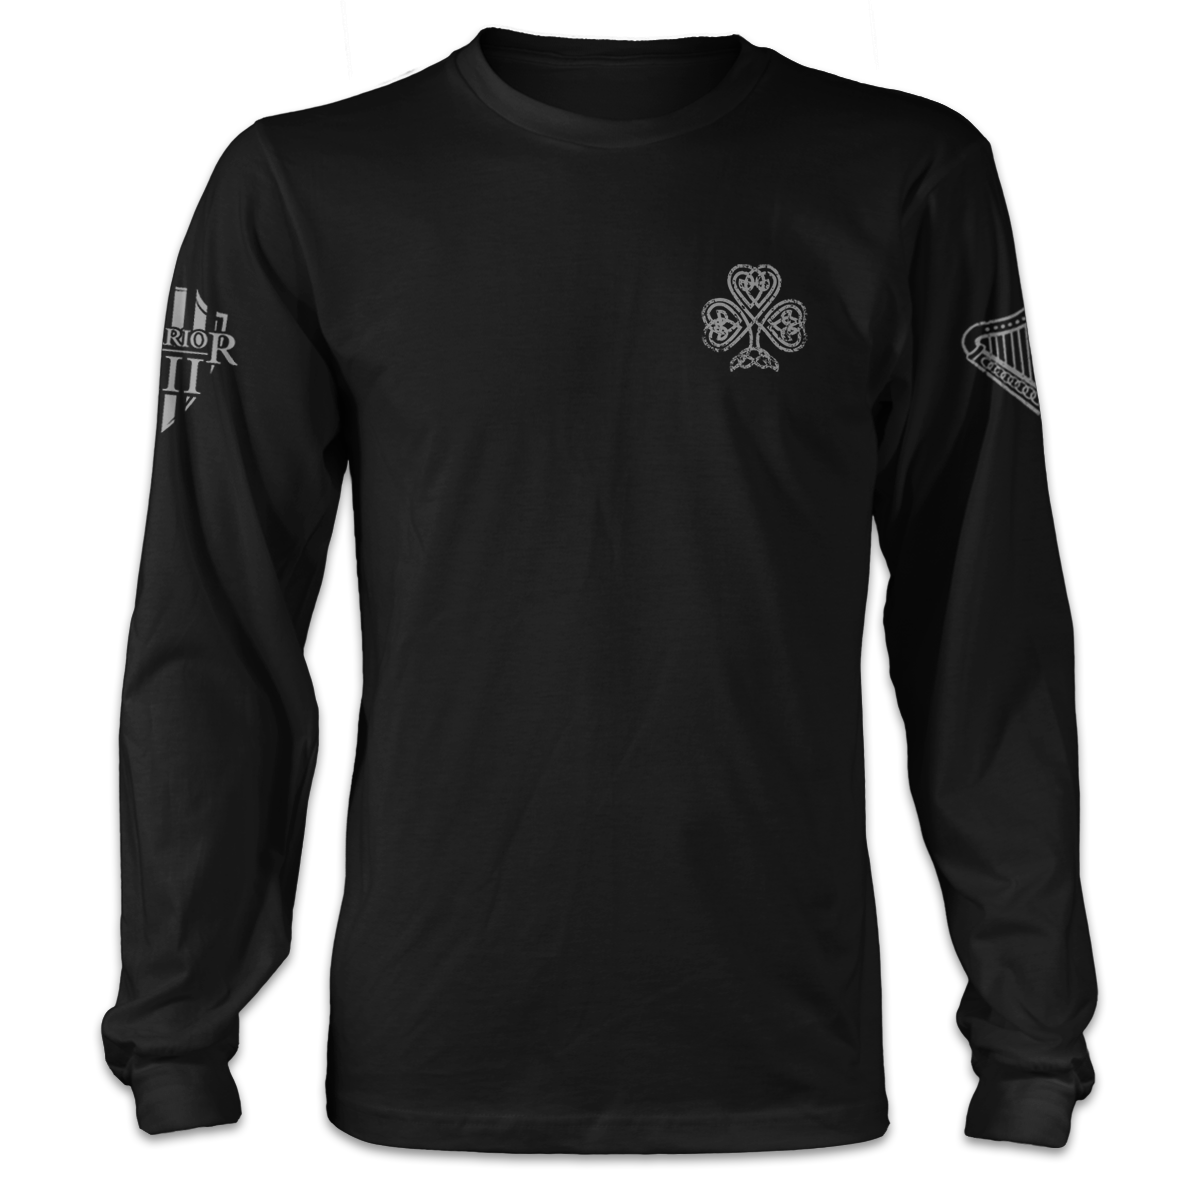 A black long sleeve shirt with a clover printed on the front left chest.